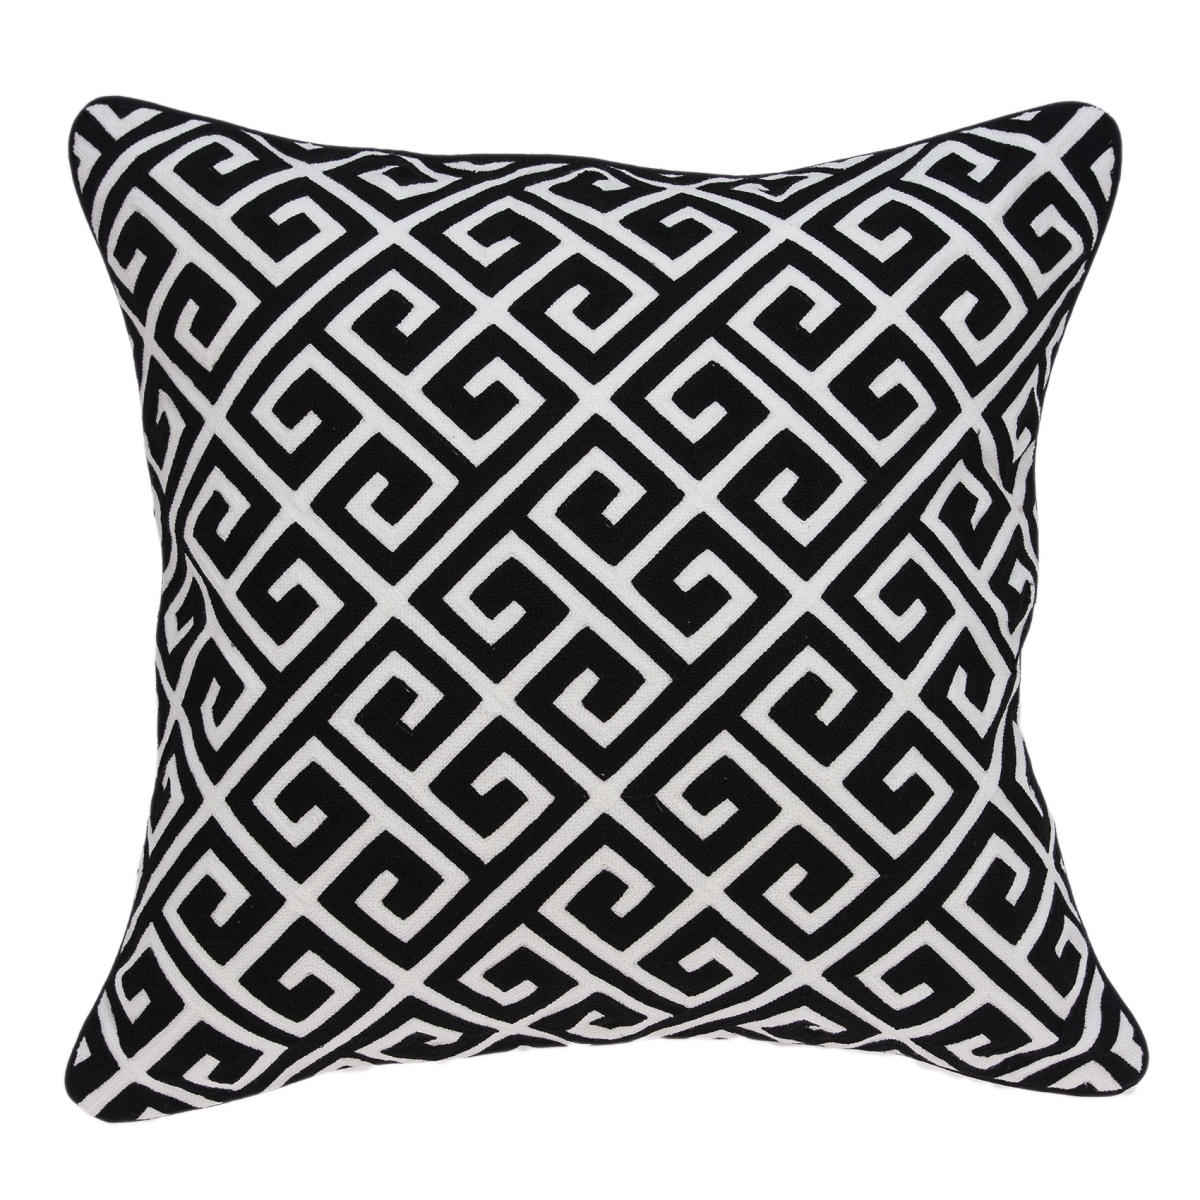 Pila11002p Cameo Black & White Square Transitional Pillow Cover With Poly Insert - 20 X 20 X 7 In.